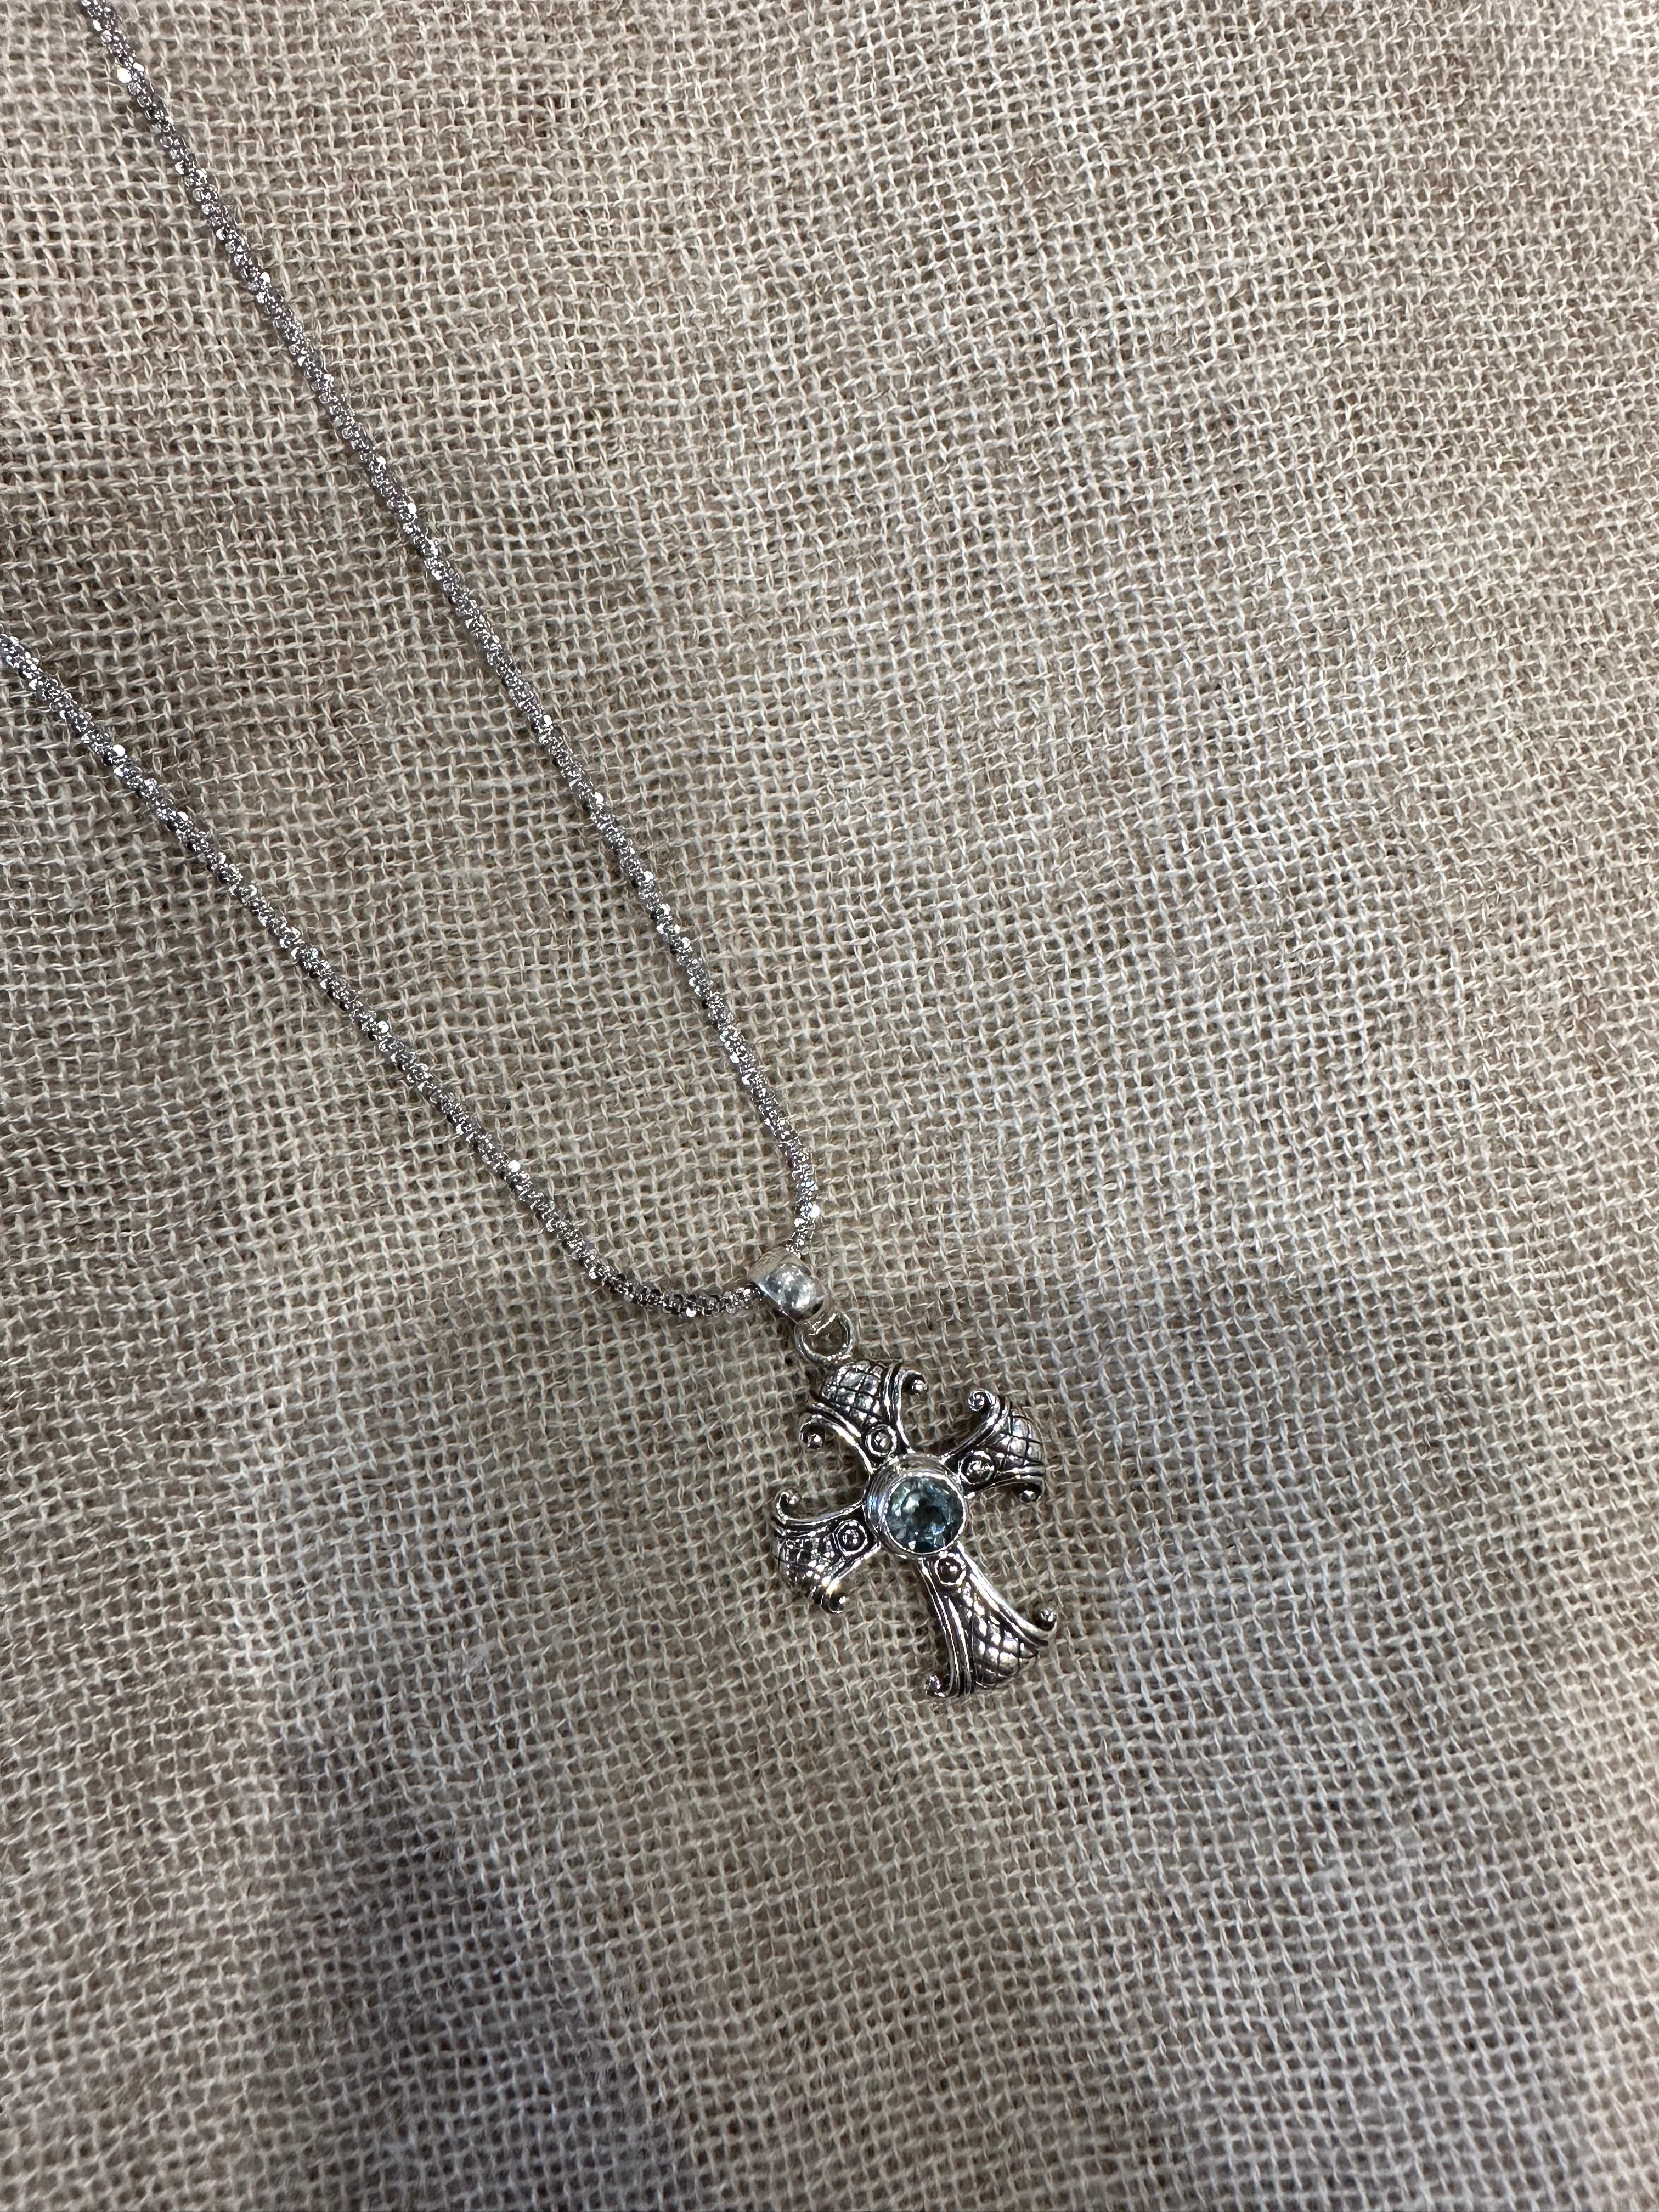 AYUN STERLING SILVER NECKLACE CROSS